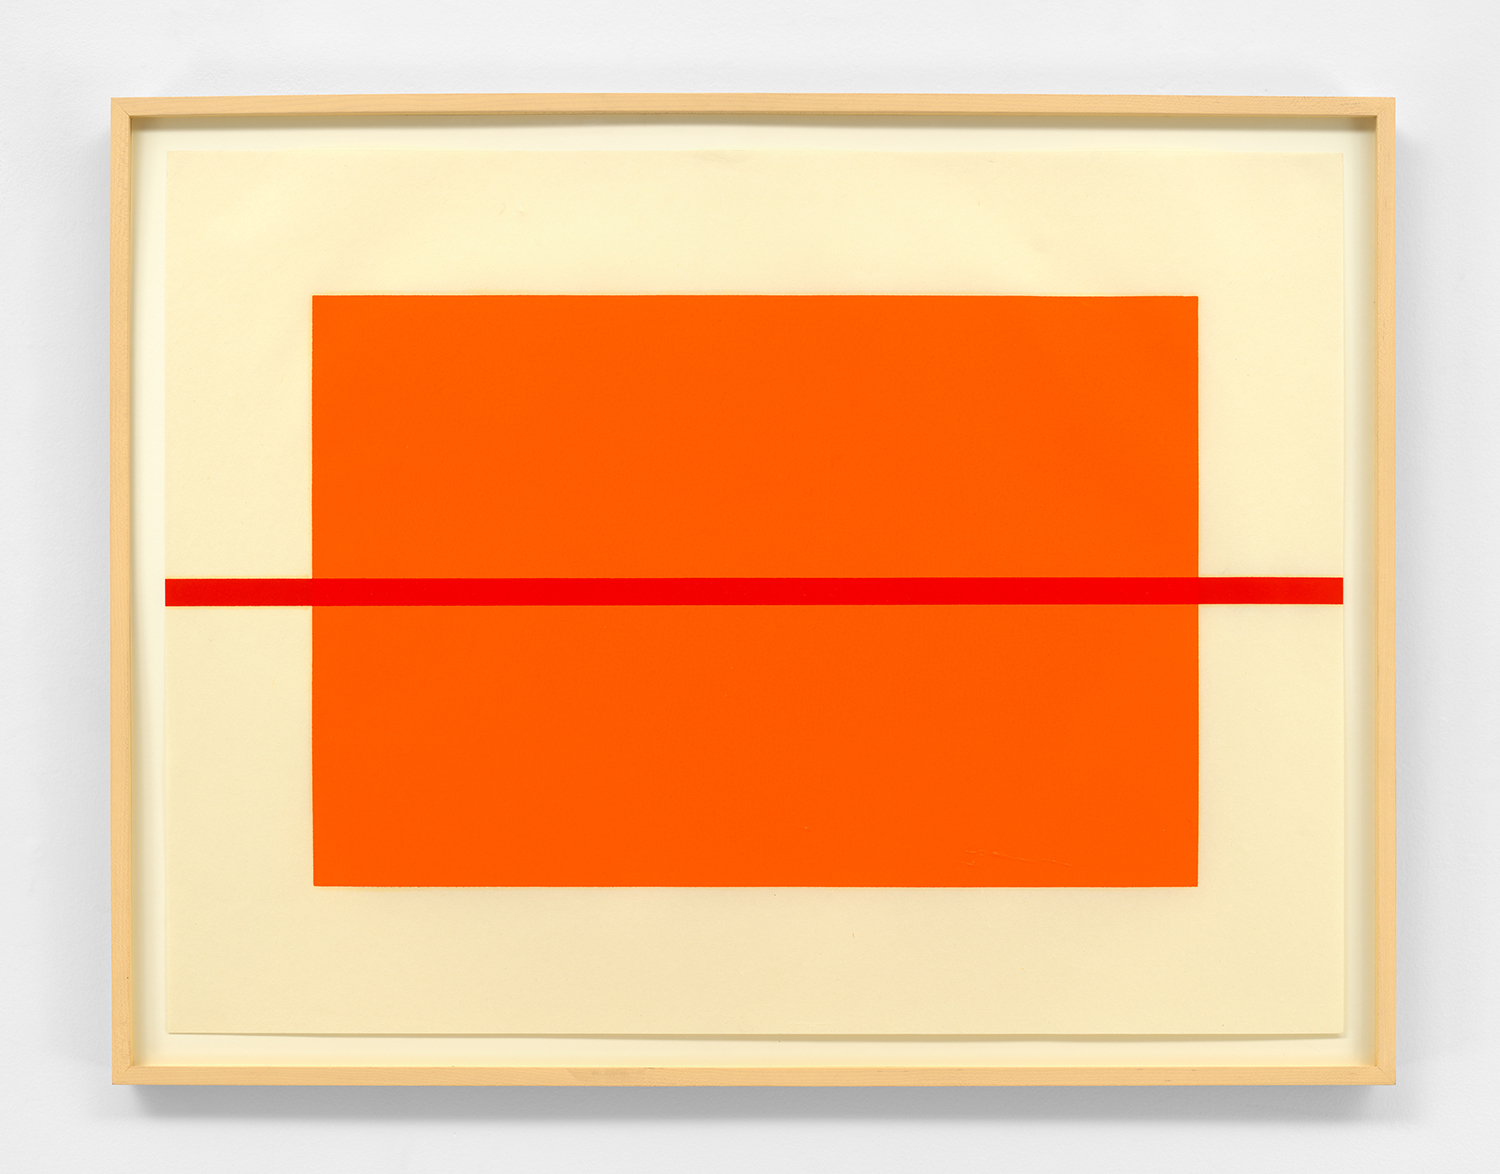 Untitled by Donald Judd